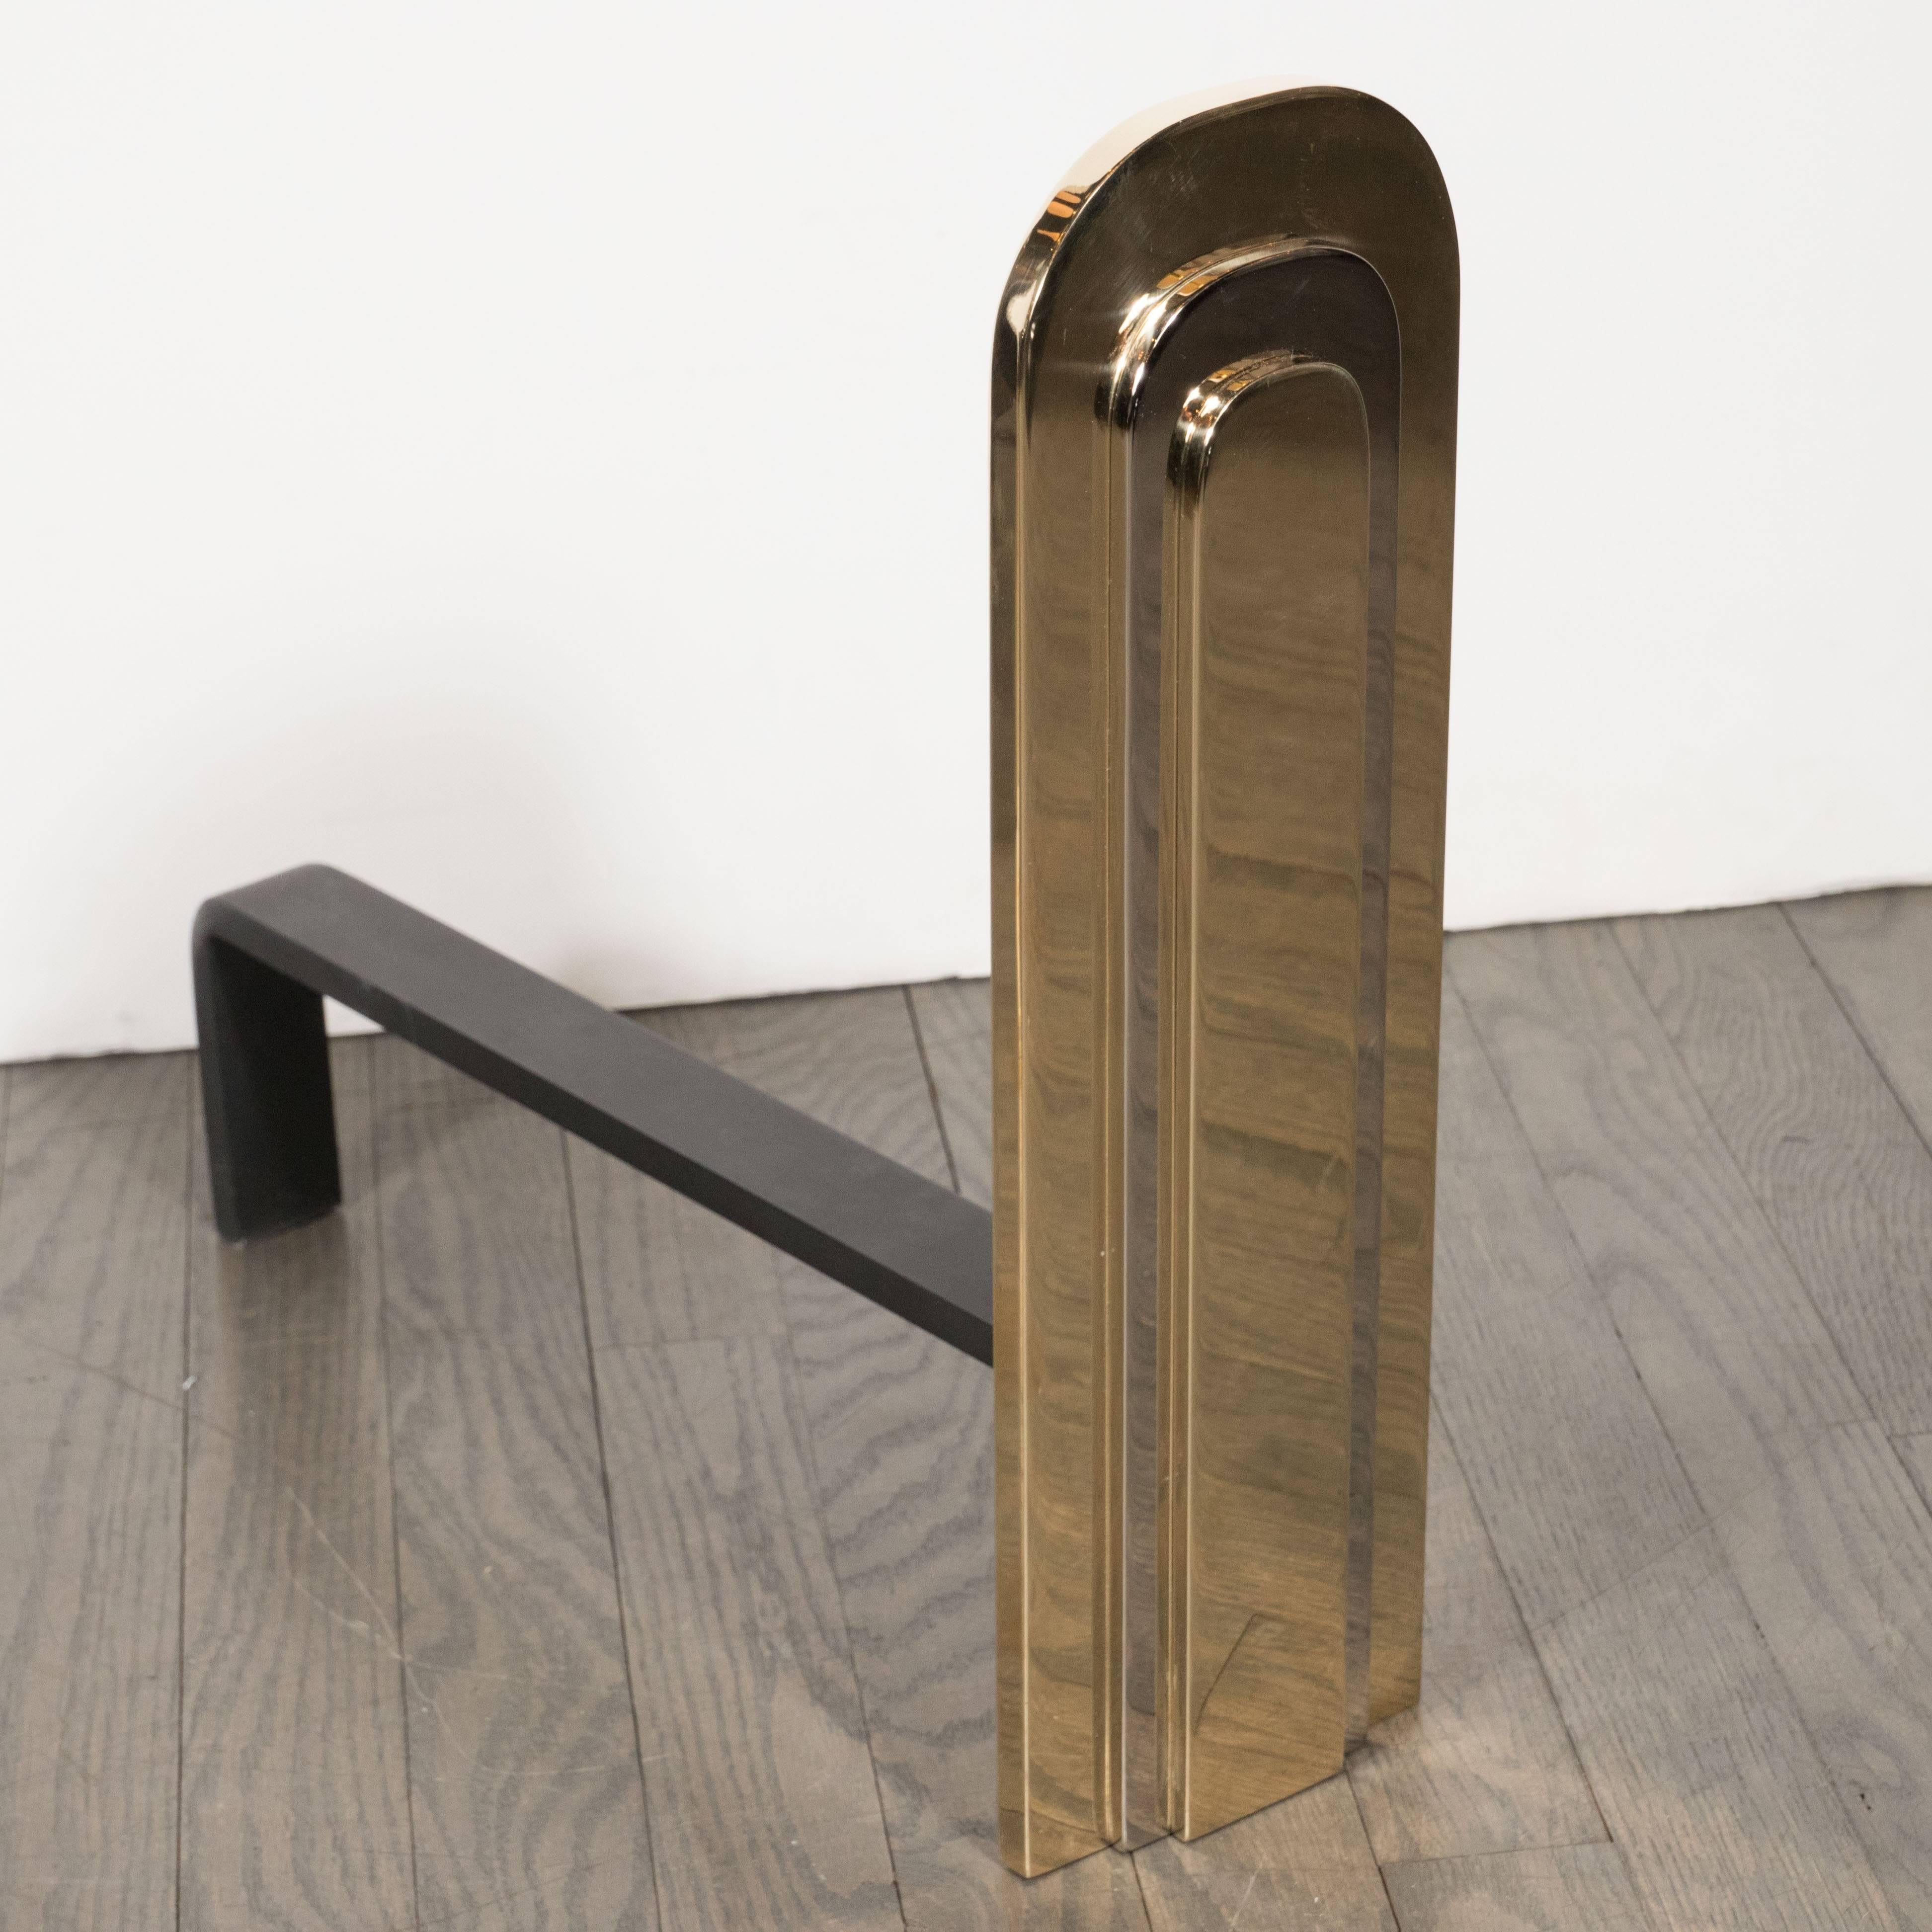 Handmade by artisans in New York state, this pair of modernist andirons embody the old world craftsmanship and design aesthetic of a bygone era. With their skyscraper style construction, consisting of alternating curvilinear tiers of polished brass